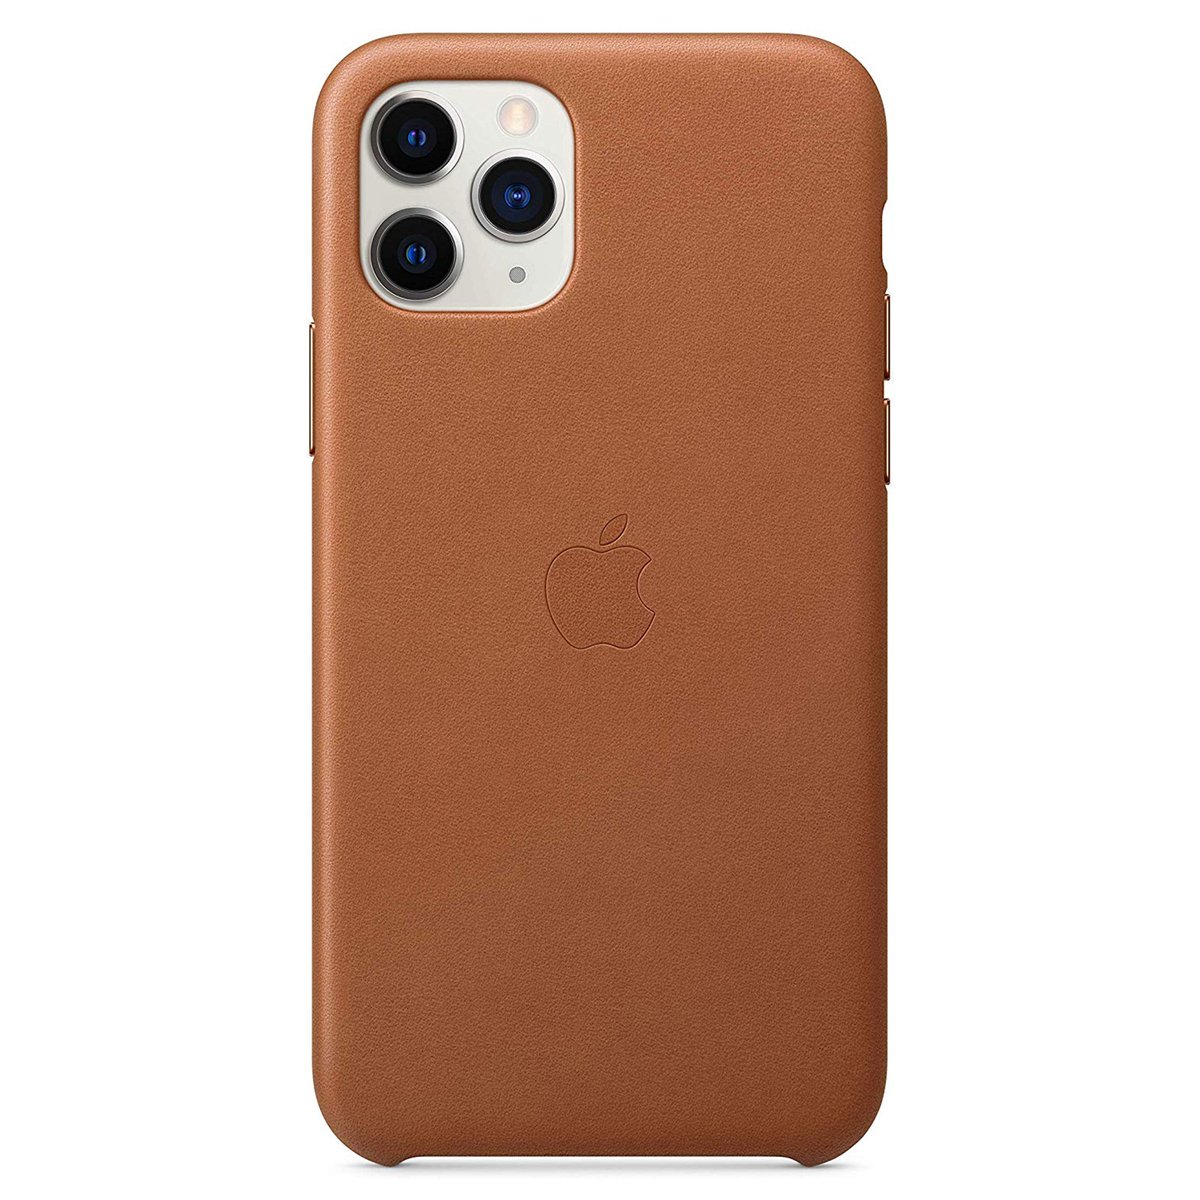 iPhone 11 Pro Leather Case MWYD2ZM Saddle Brown